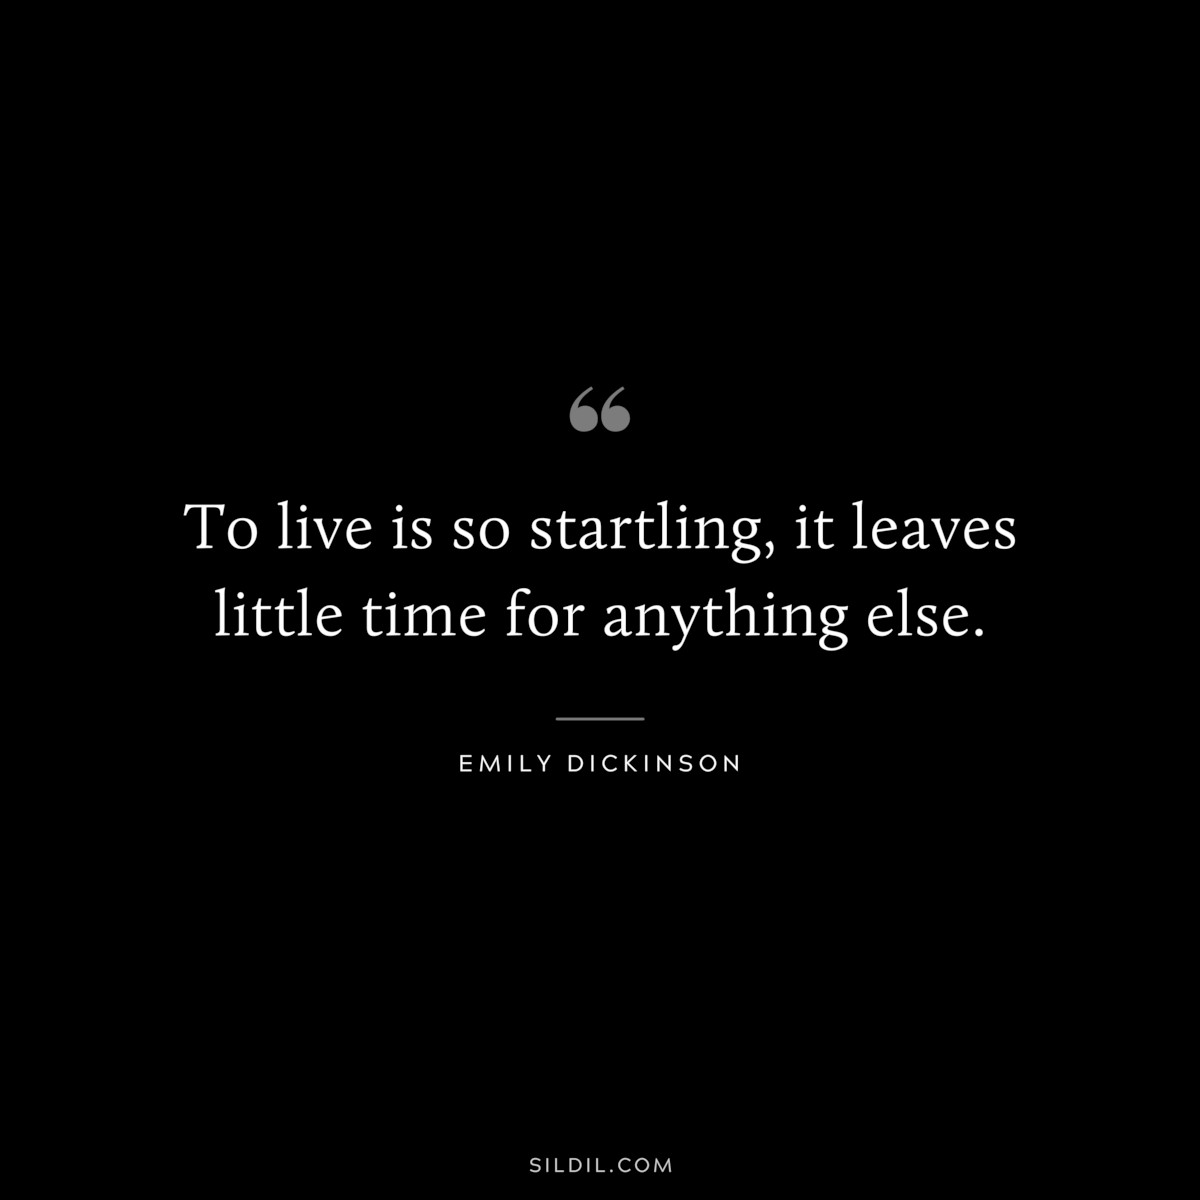 To live is so startling, it leaves little time for anything else. ― Emily Dickinson